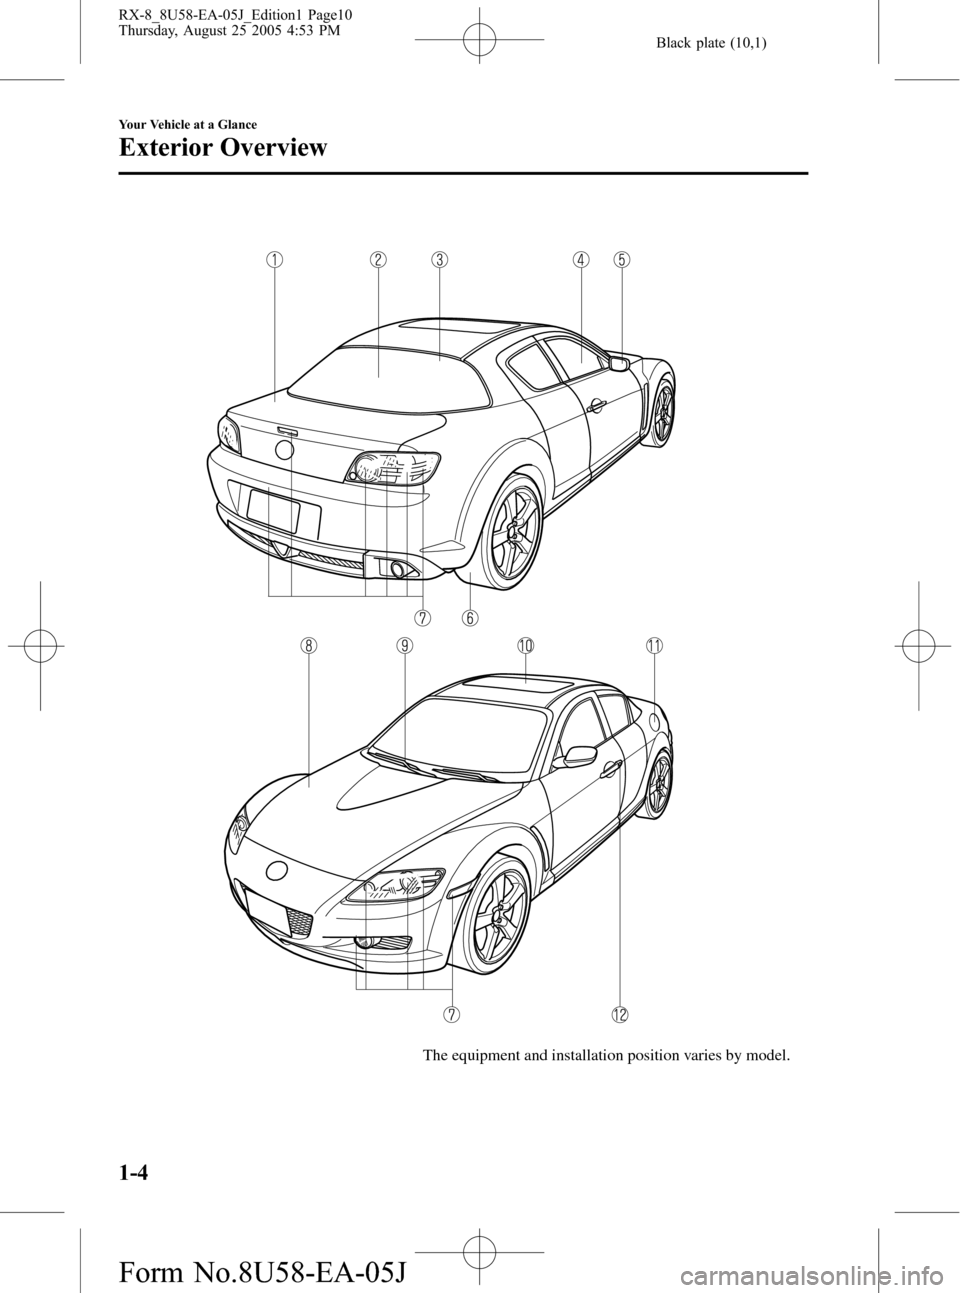 MAZDA MODEL RX 8 2006  Owners Manual (in English) Black plate (10,1)
The equipment and installation position varies by model.
1-4
Your Vehicle at a Glance
Exterior Overview
RX-8_8U58-EA-05J_Edition1 Page10
Thursday, August 25 2005 4:53 PM
Form No.8U5